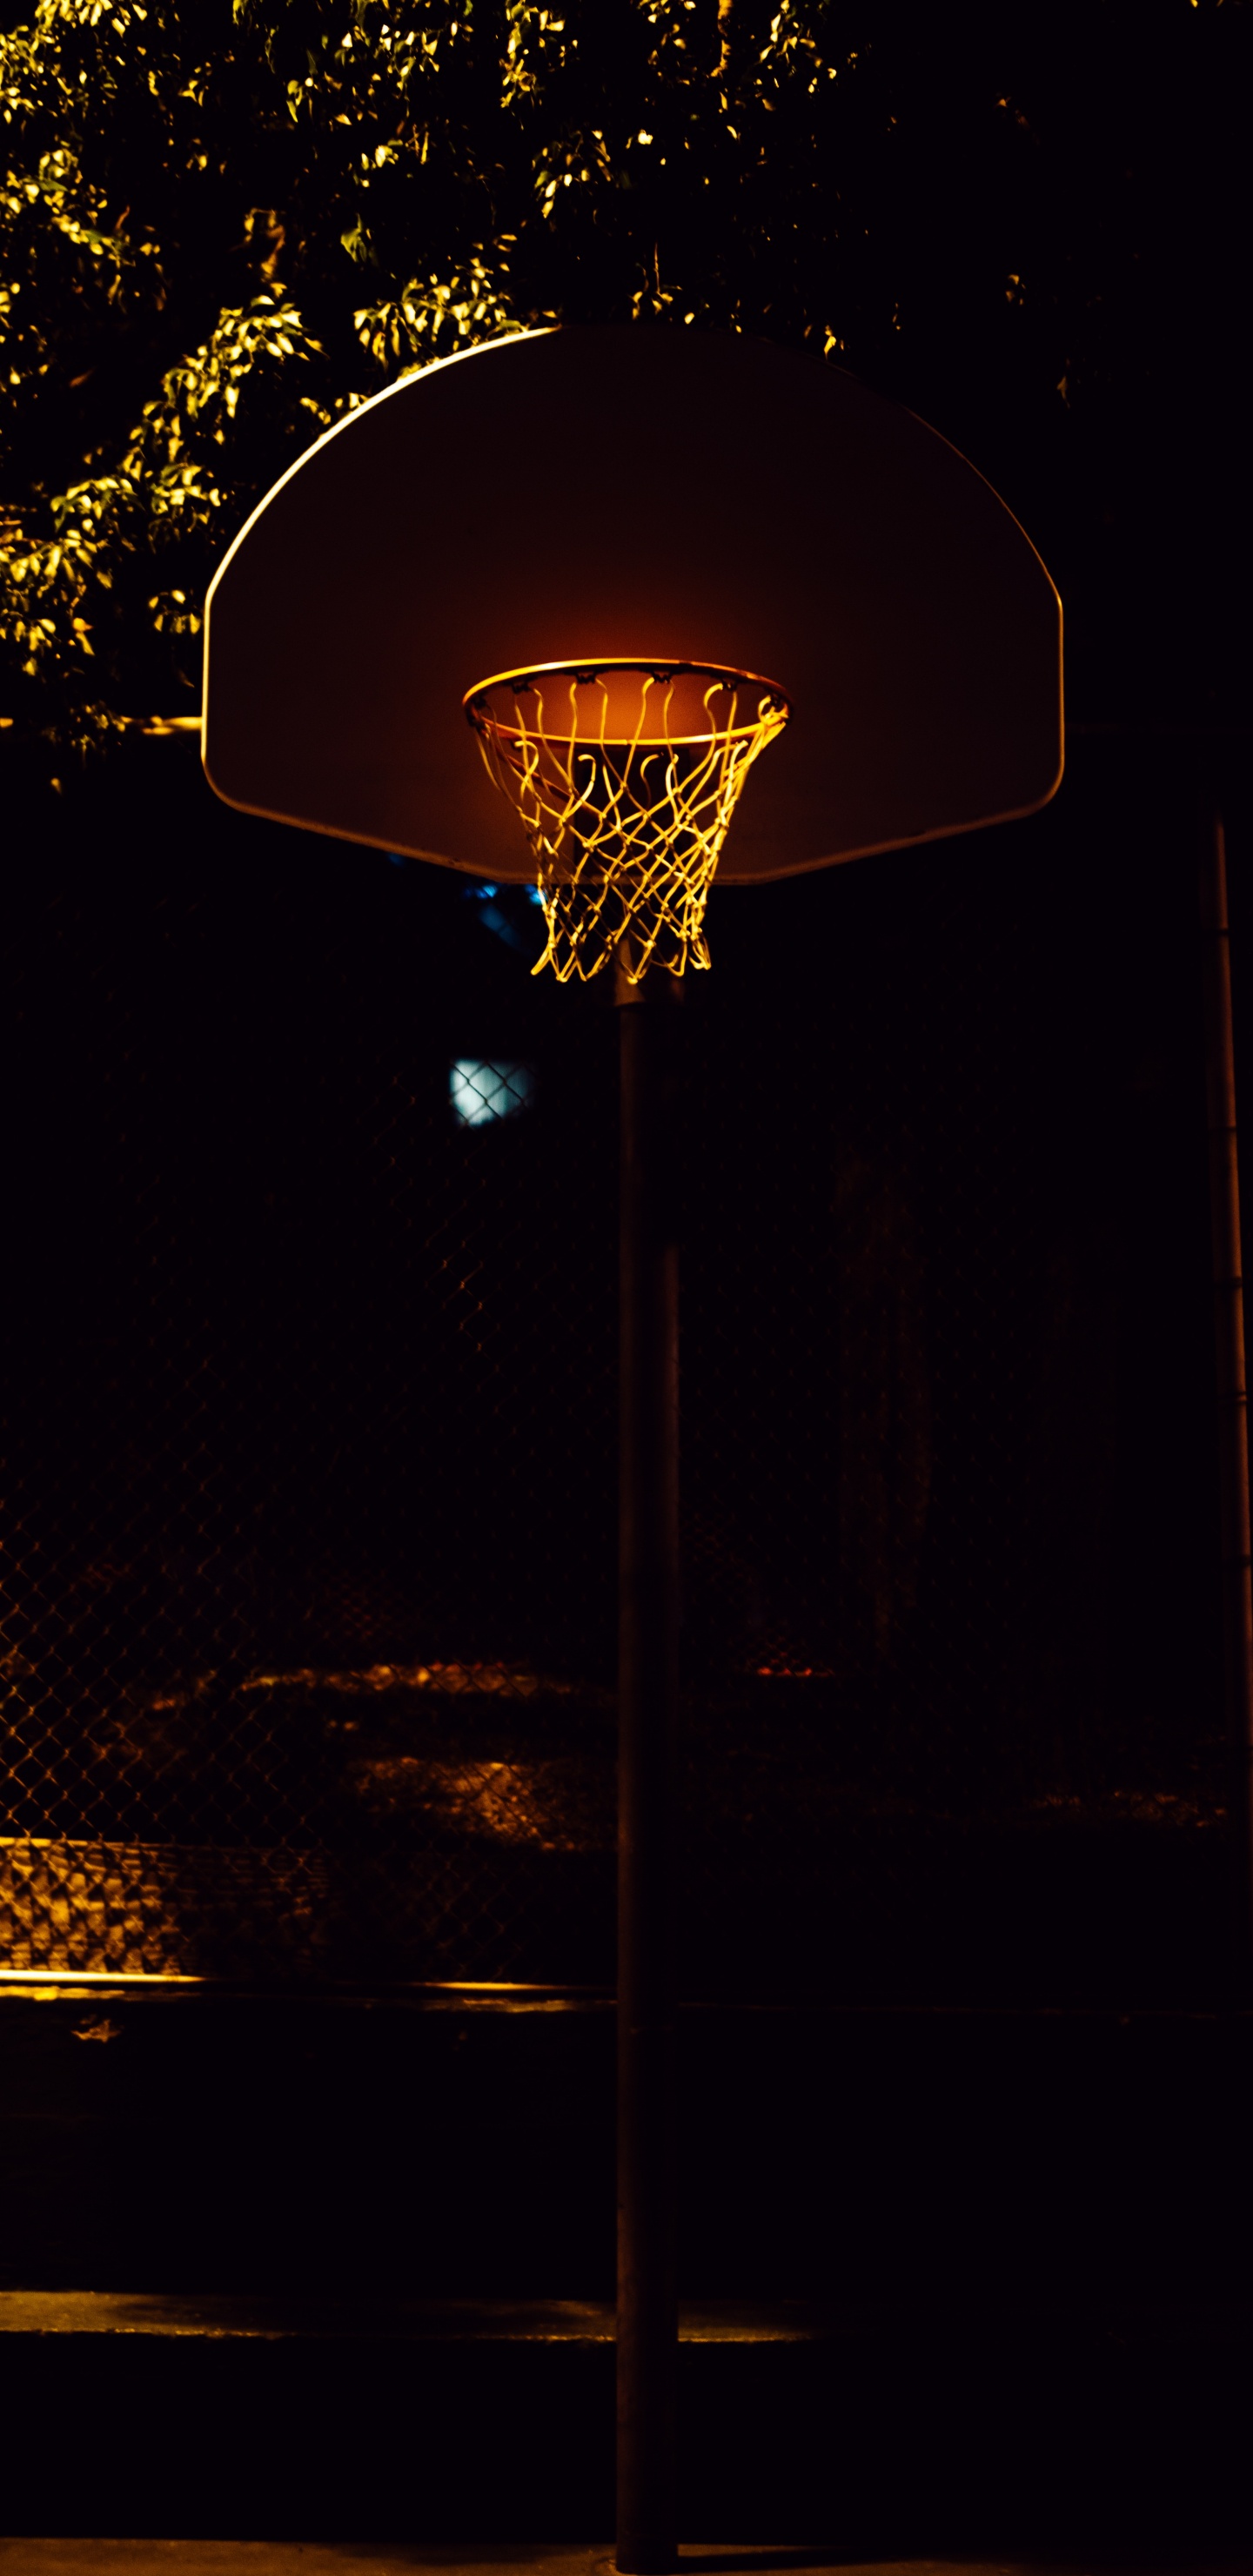 Basketball Hoop With Light Turned on During Night Time. Wallpaper in 1440x2960 Resolution